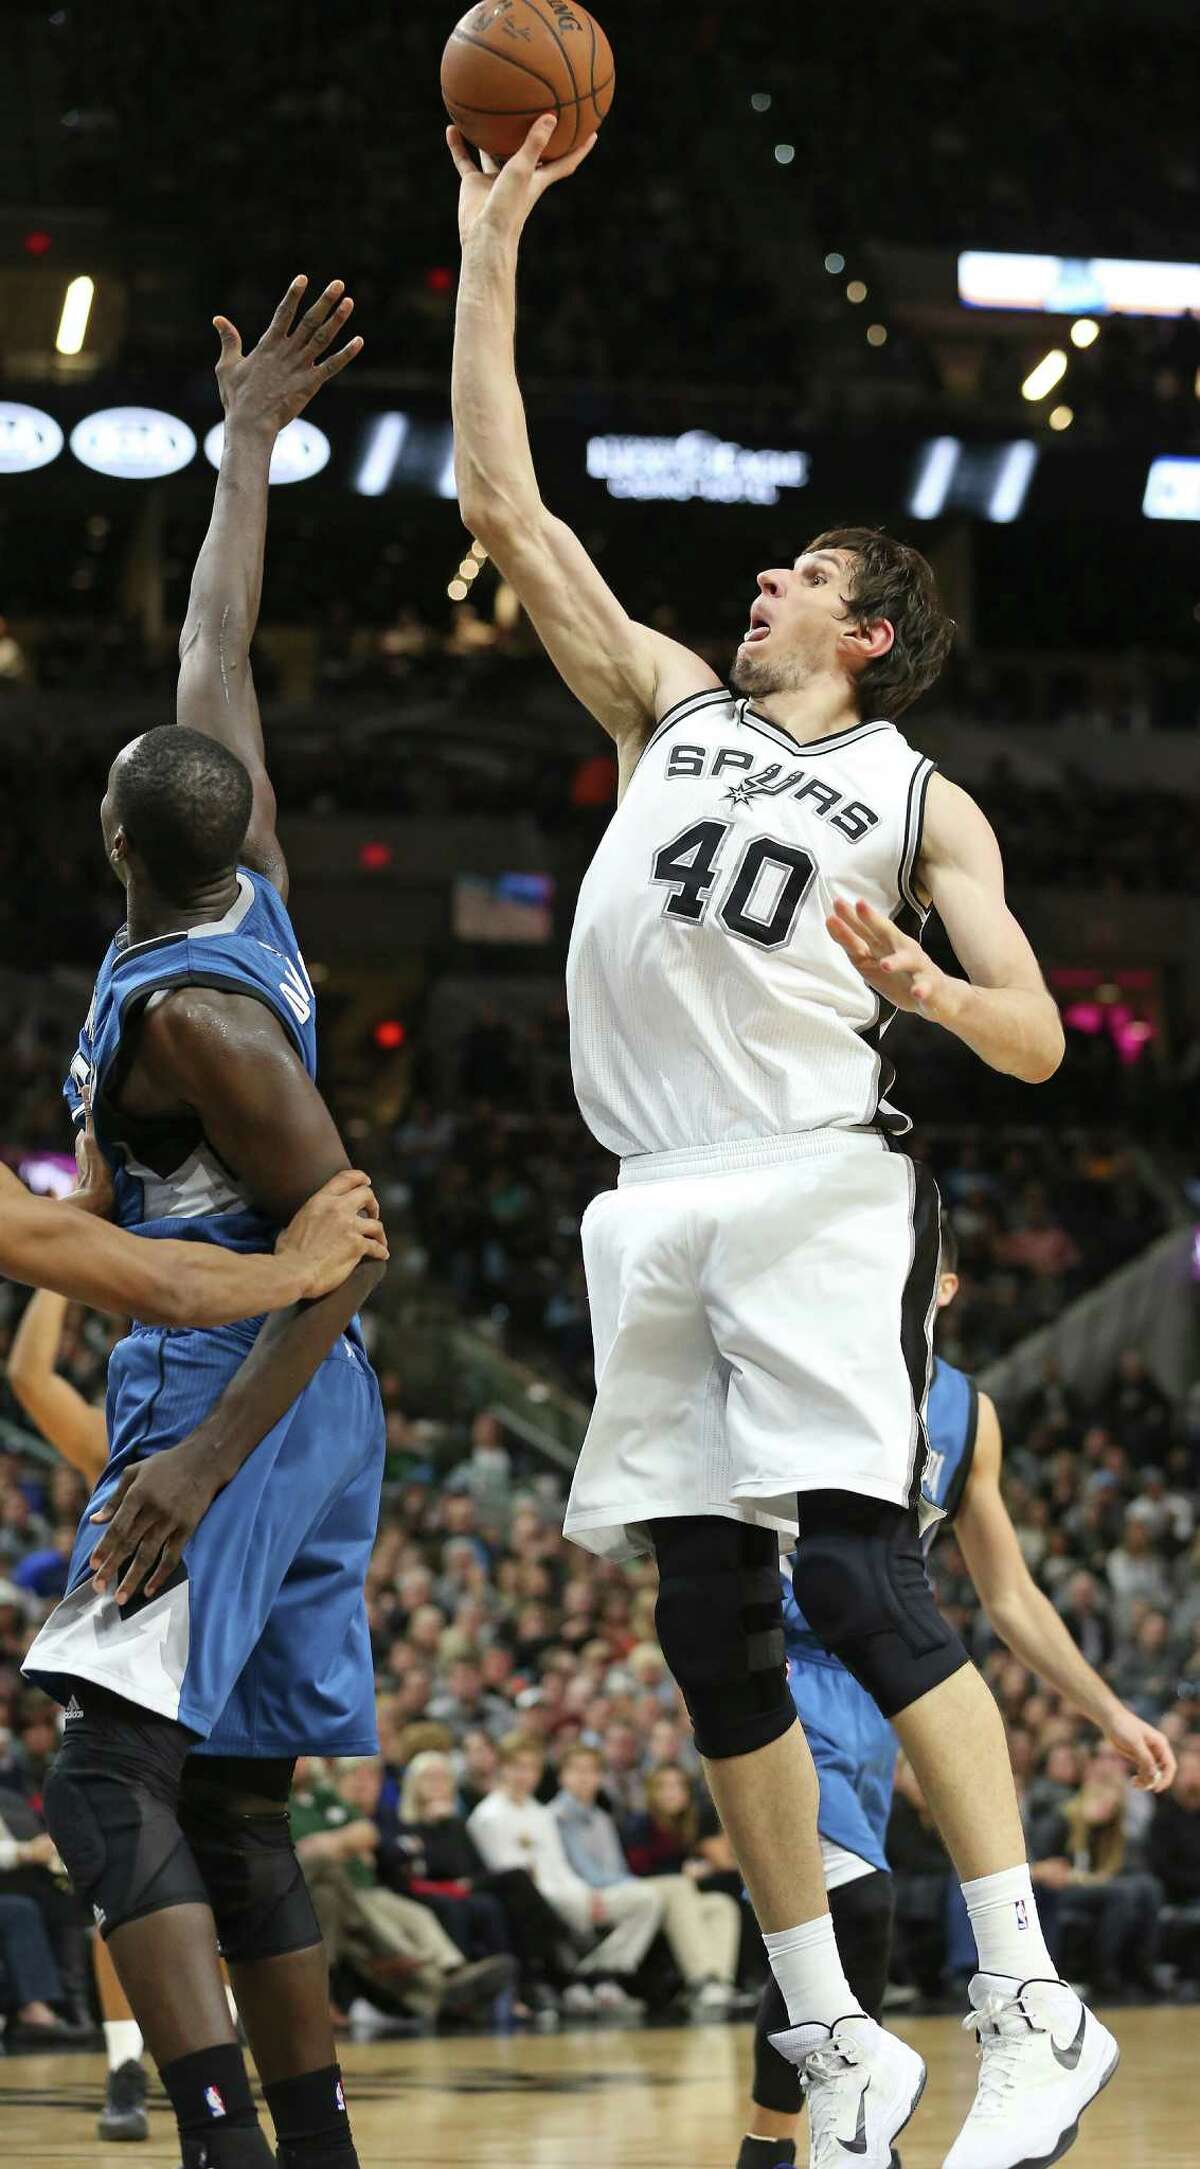 Boban Marjanovic puts up a shot during a good run in the second half as the Spurs host the Minnesota Timberwolves at the AT&T Center on December 28, 2015.